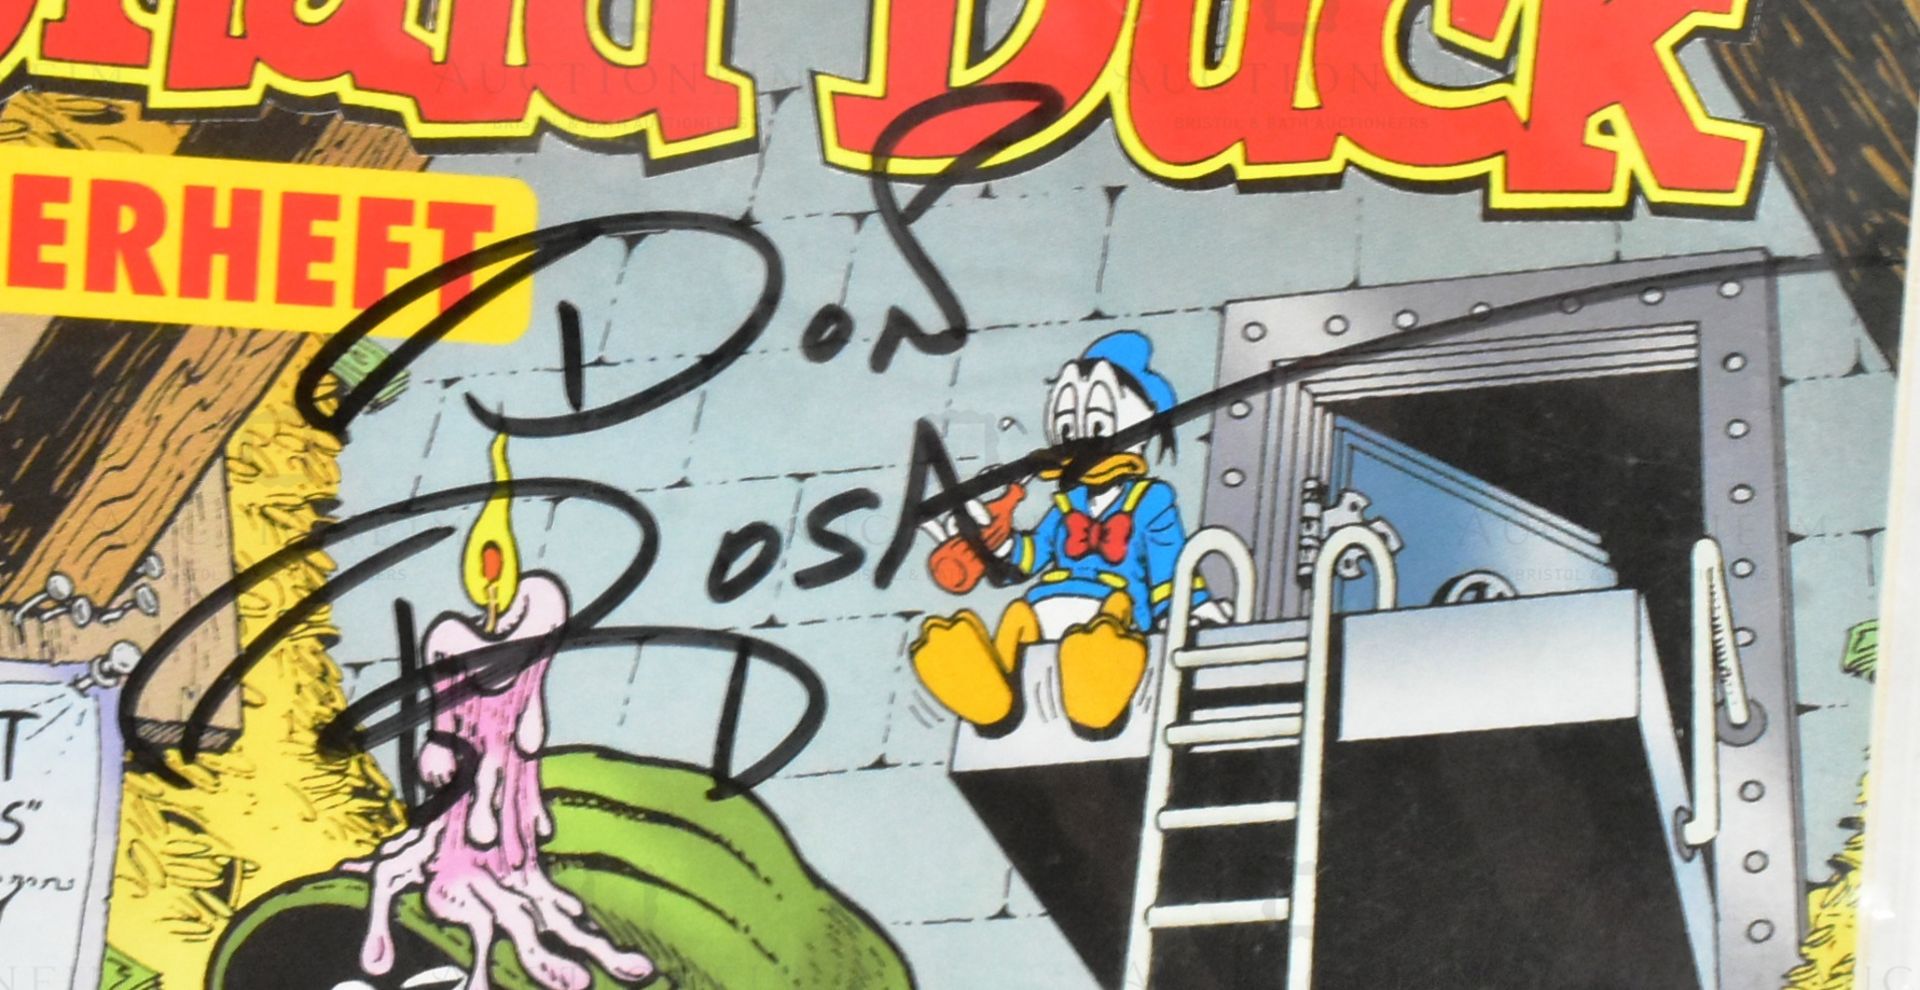 ESTATE OF JEREMY BULLOCH - DONALD DUCK - DON ROSA SIGNED COMIC BOOK - Image 2 of 4